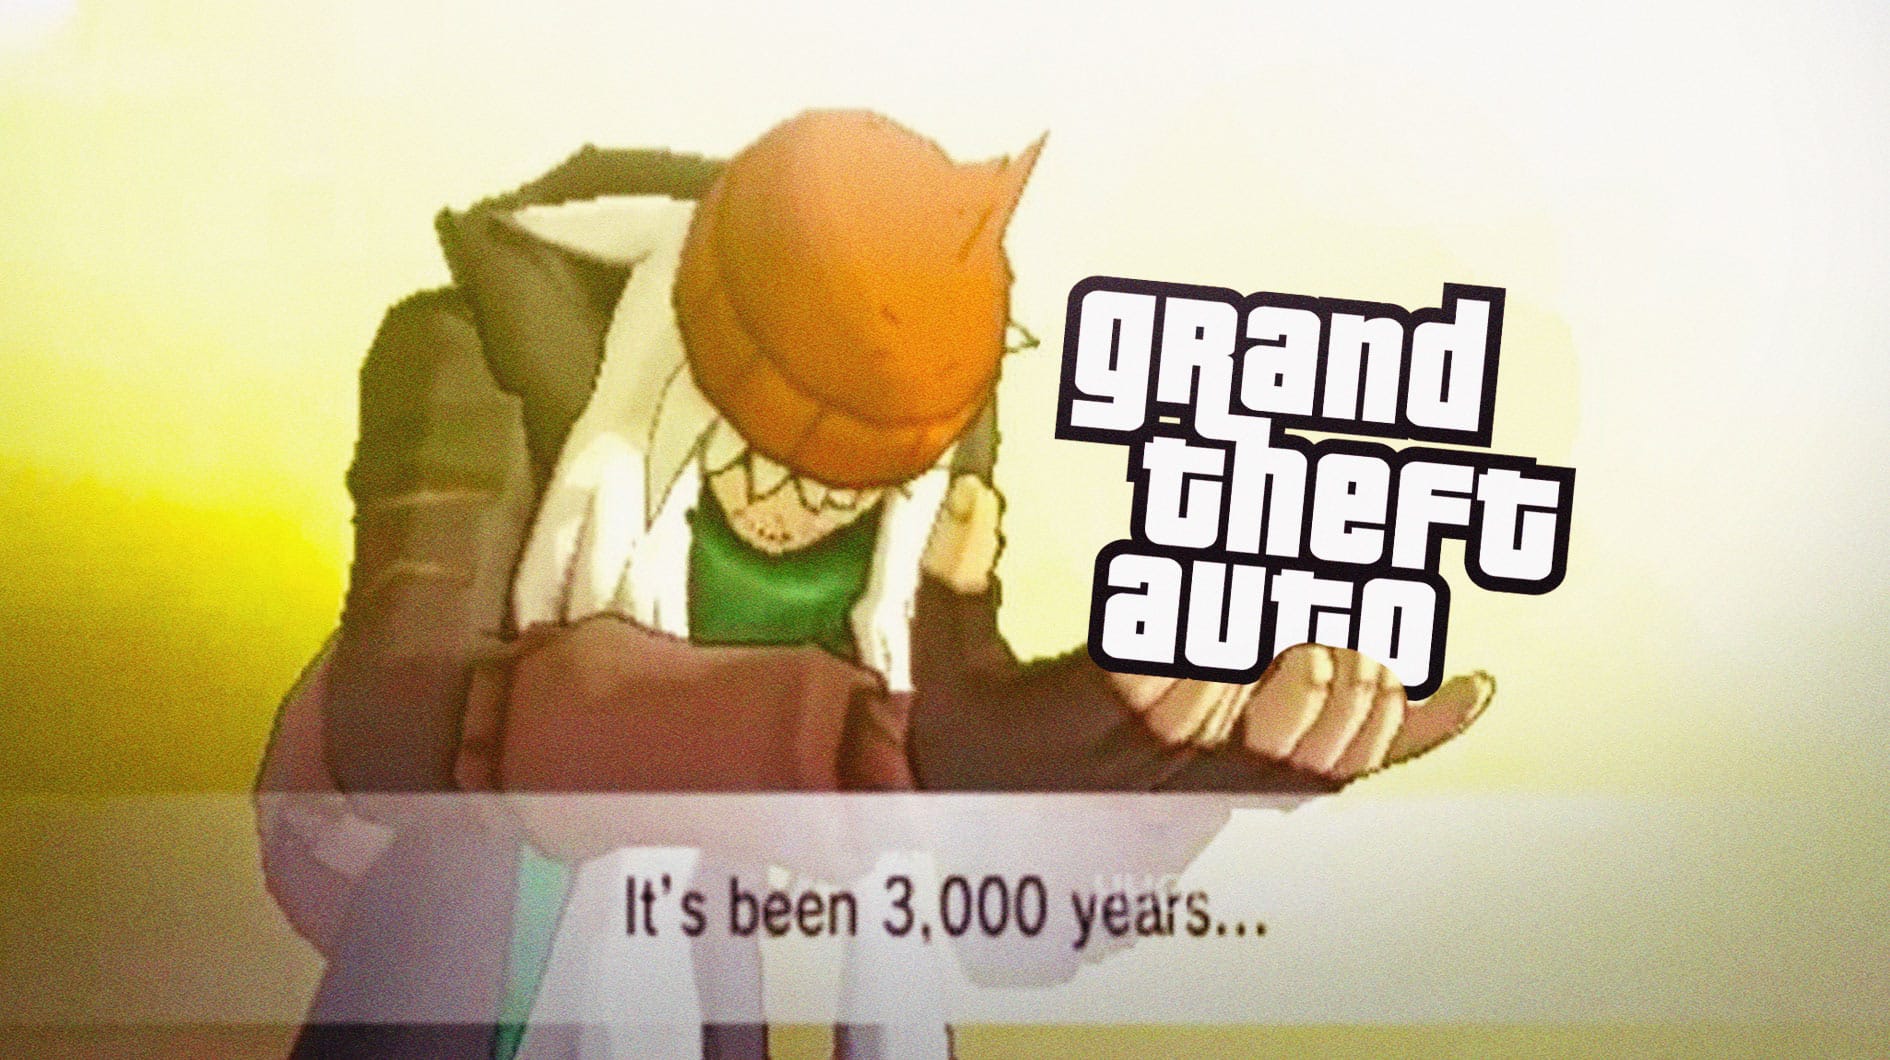 The Official GTA 6 Trailer Announcement (Confirmed by Rockstar